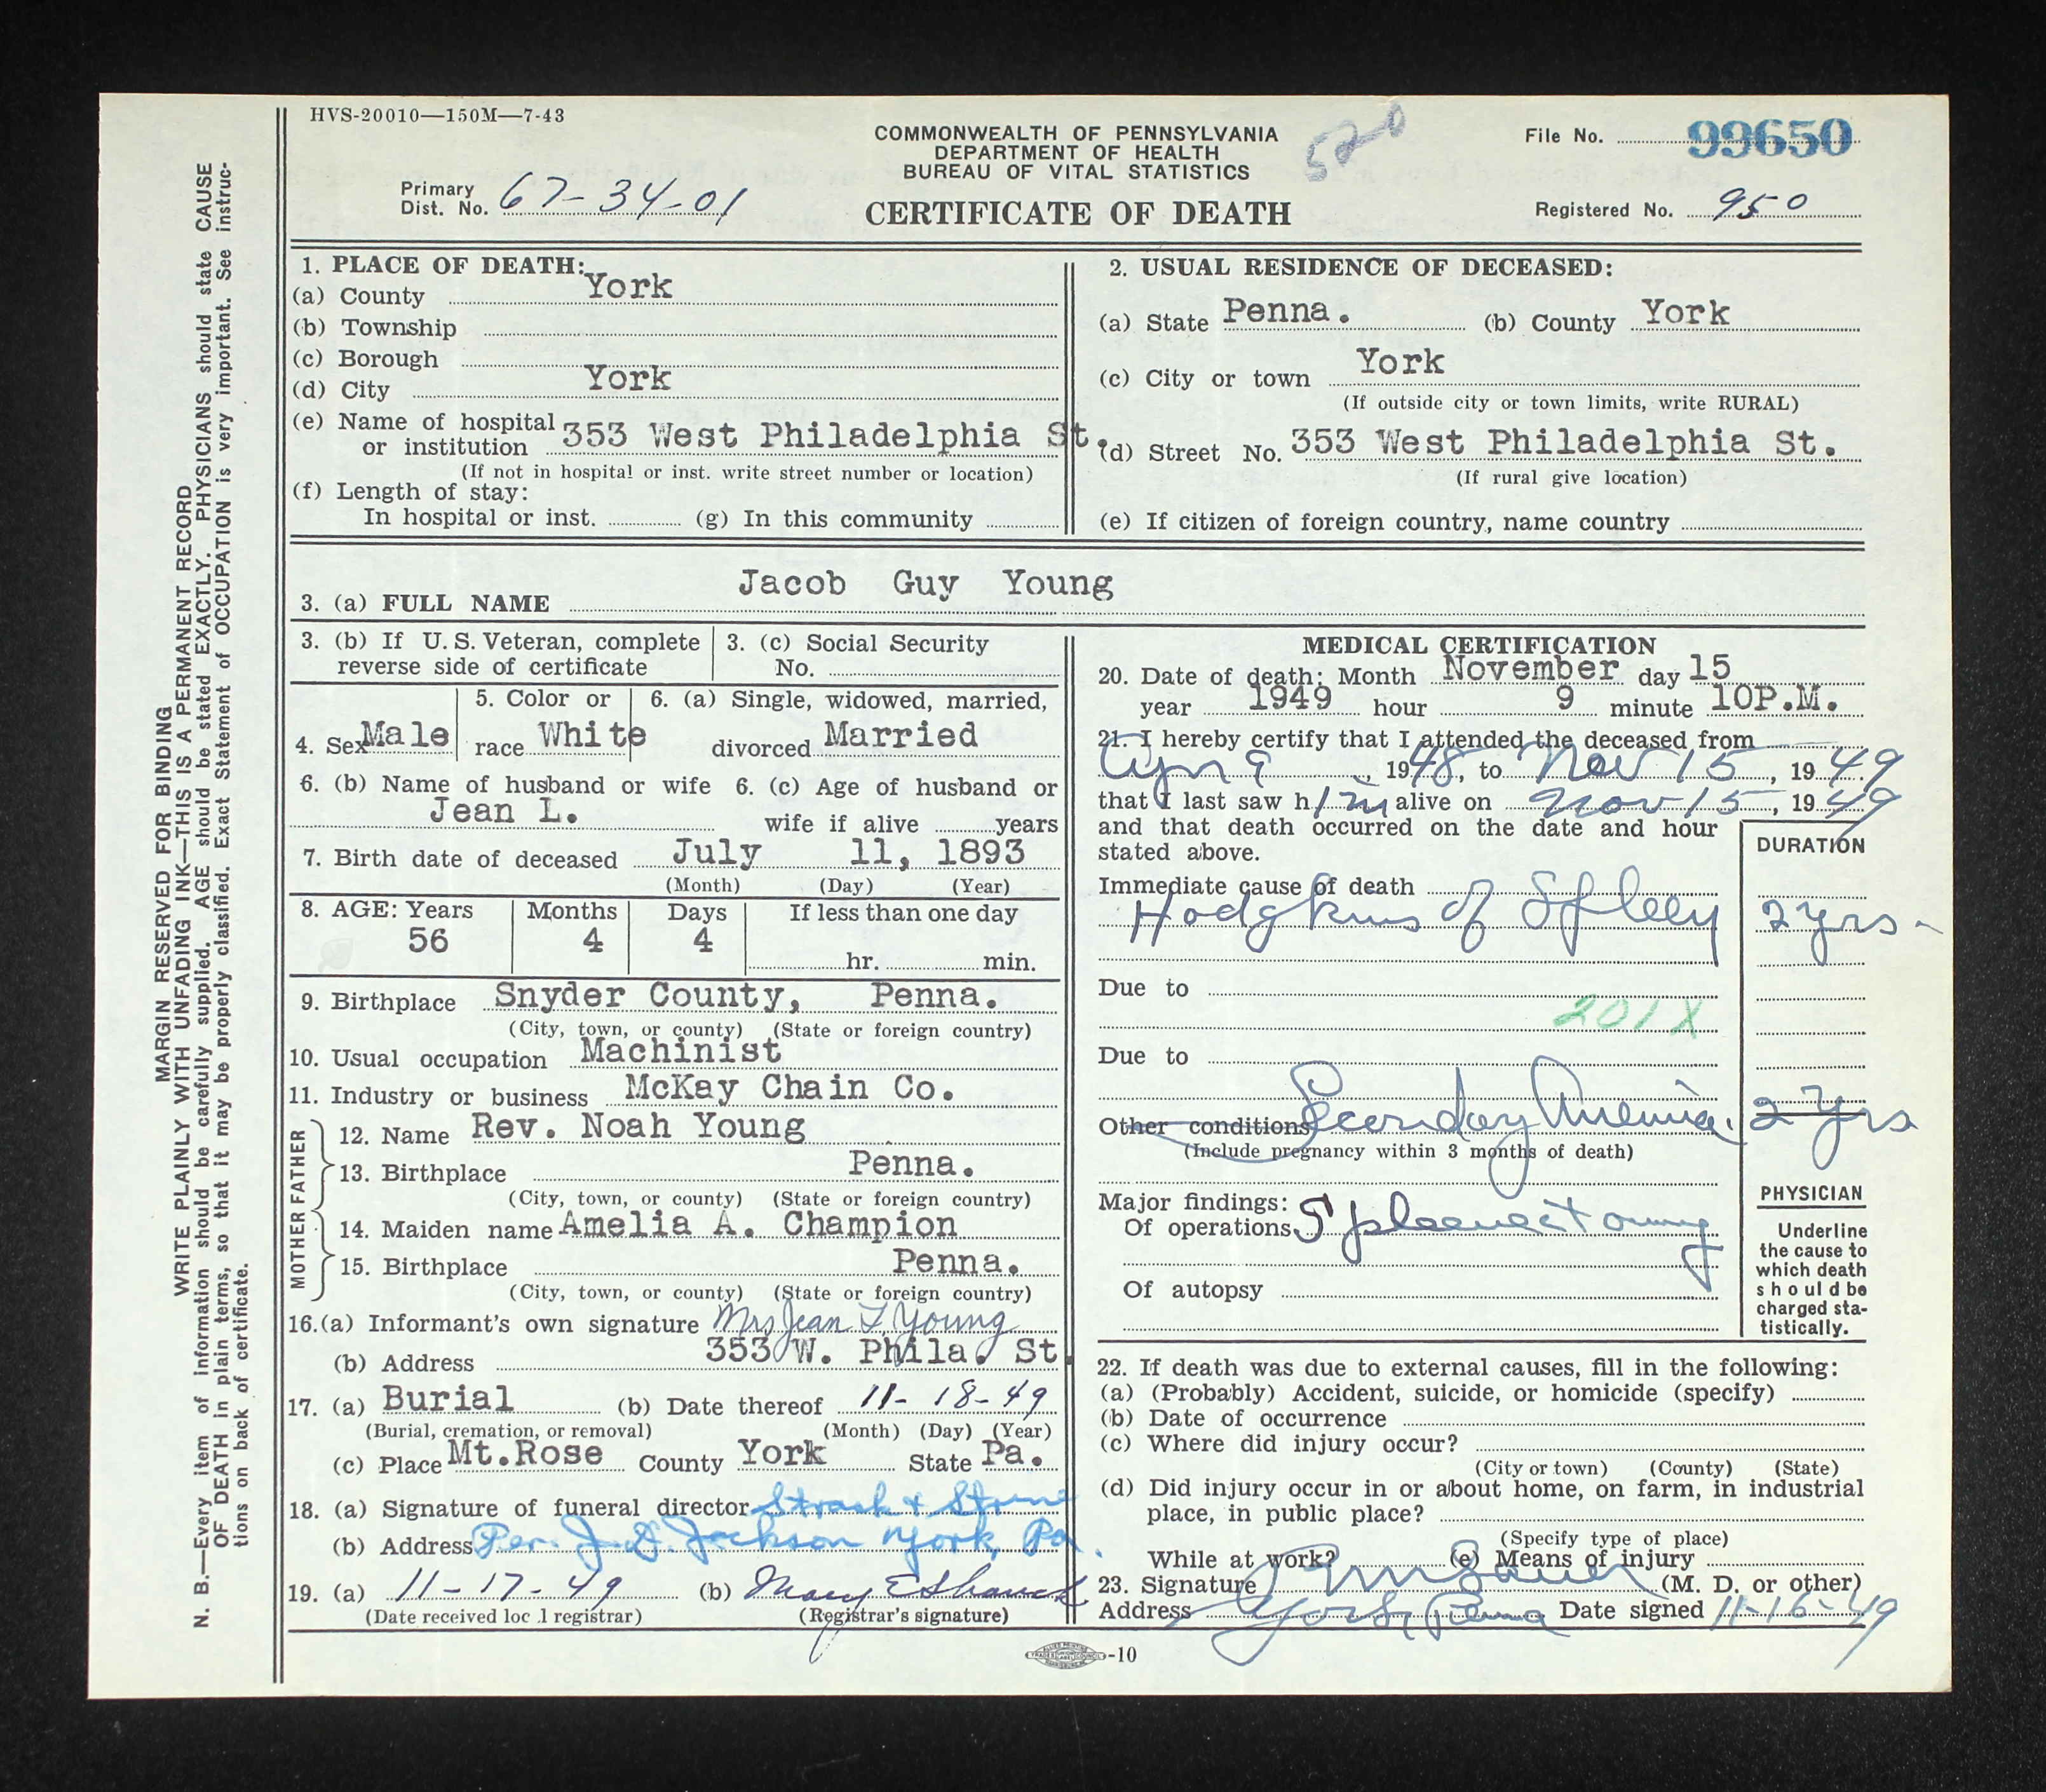 Jacob Guy Young, Death Certificate